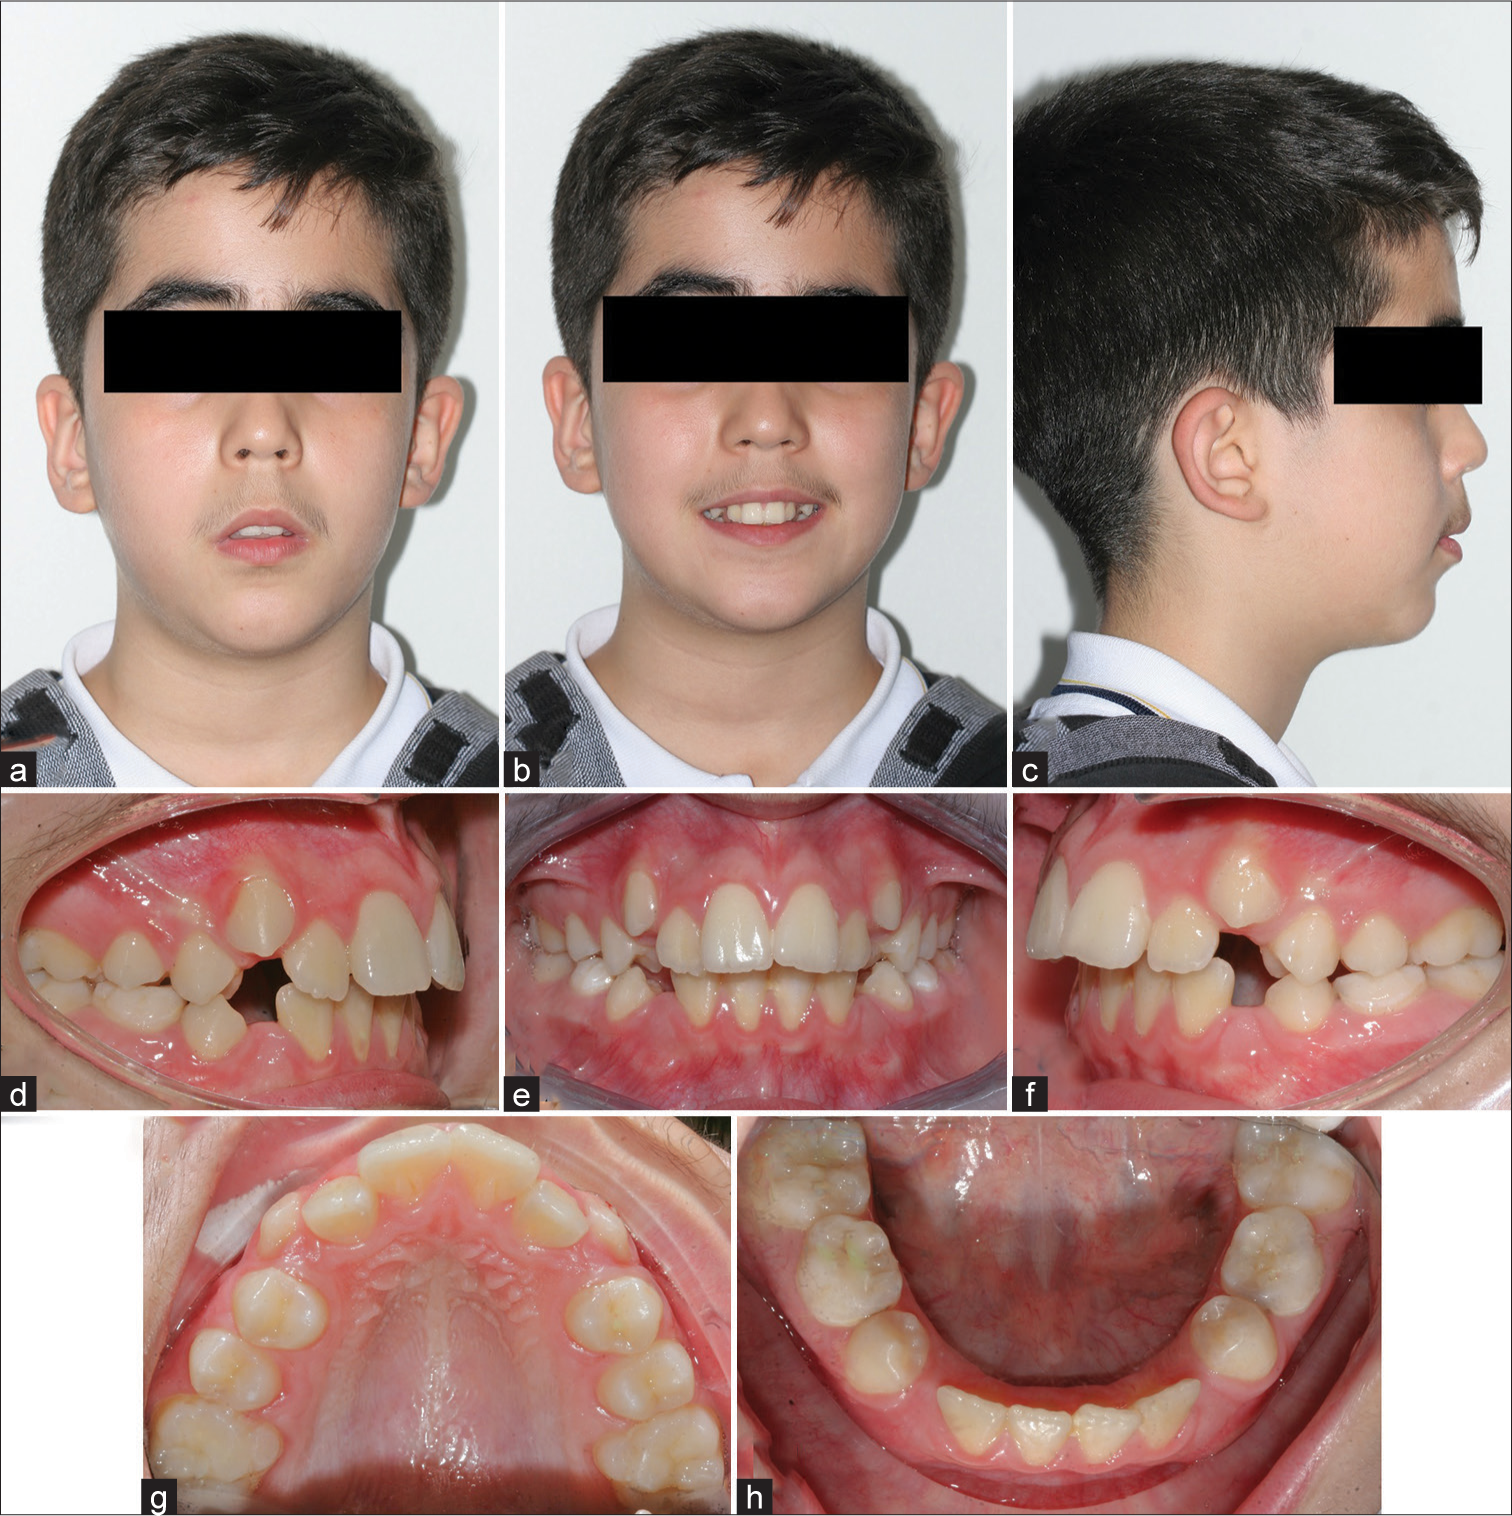 Effects of two-phase treatment with functional appliances versus one-phase treatment with pre-molar extraction in Class II div 1 monozygotic twins: A case study